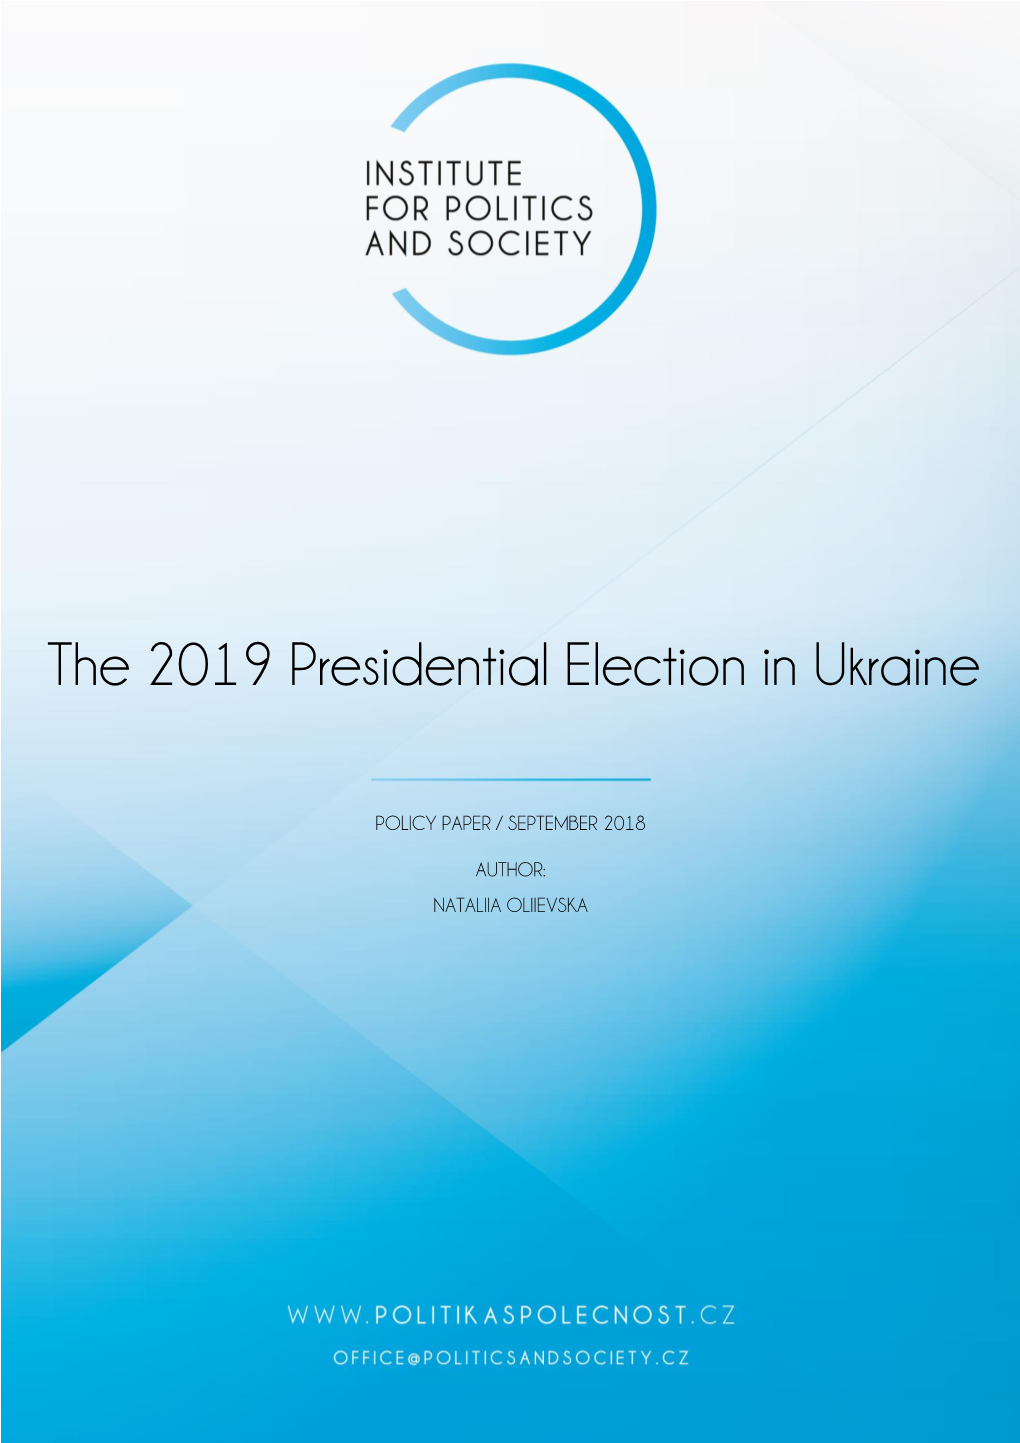 The 2019 Presidential Election in Ukraine